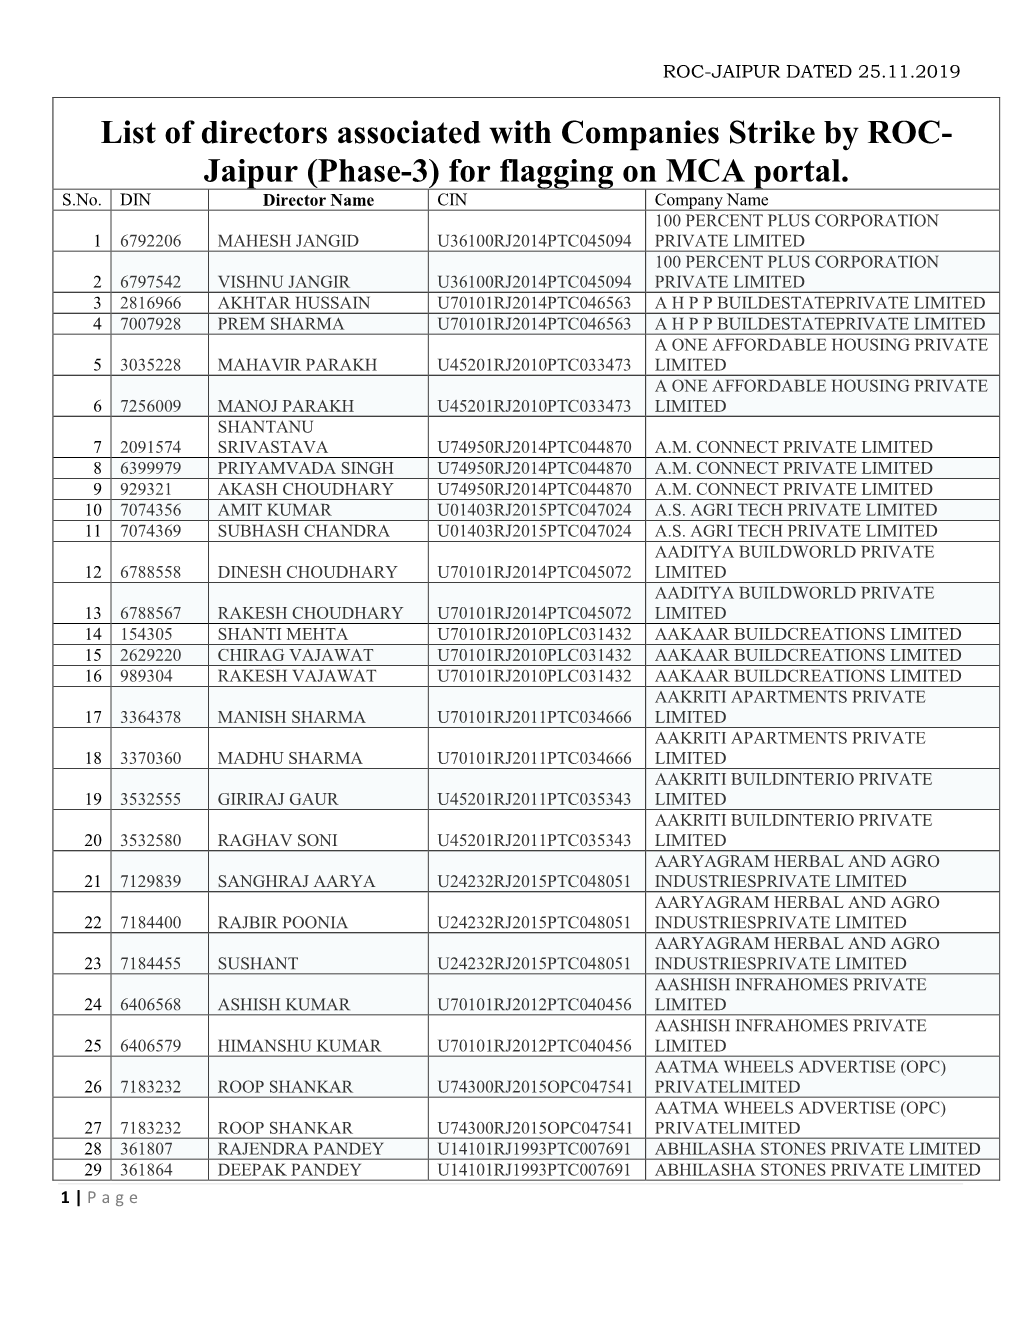 List of Directors Associated with Companies Strike by ROC- Jaipur (Phase-3) for Flagging on MCA Portal. S.No